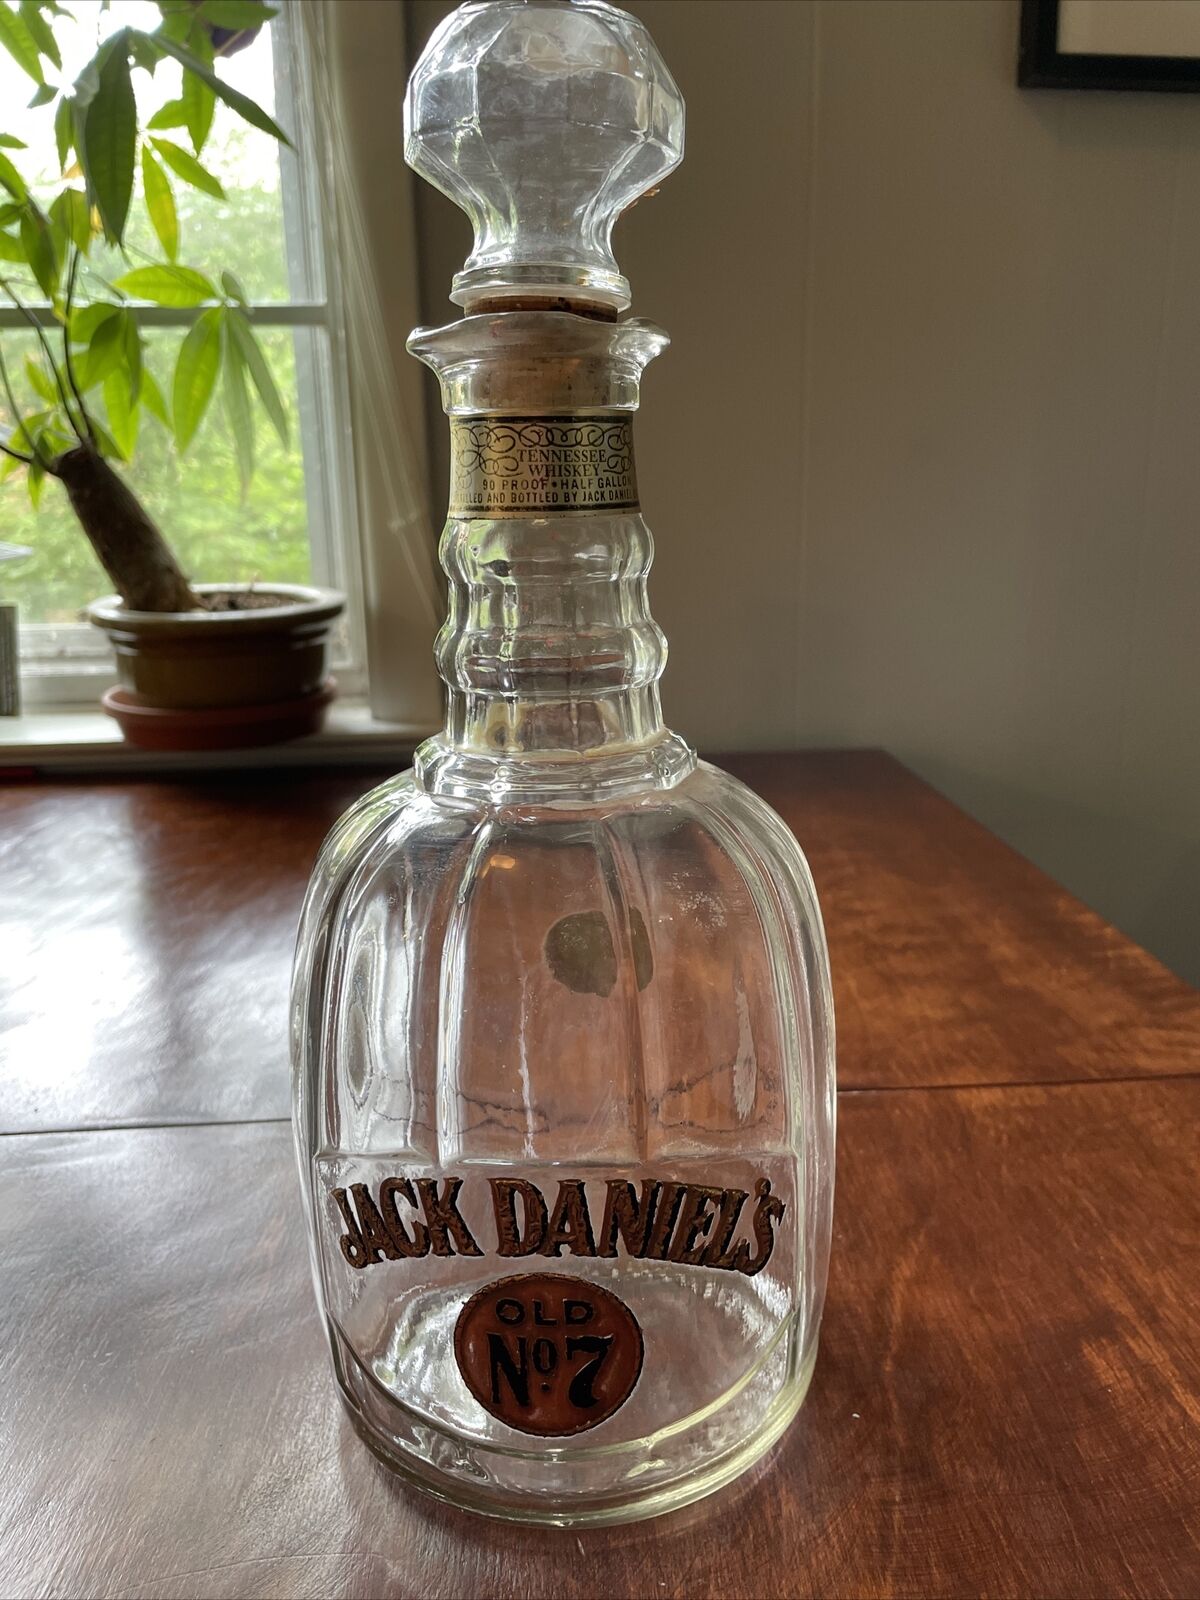 Vintage Jack Daniels Bottle Old No. 7 Glass Clear 13” Tall Decanter 1/2 gallon